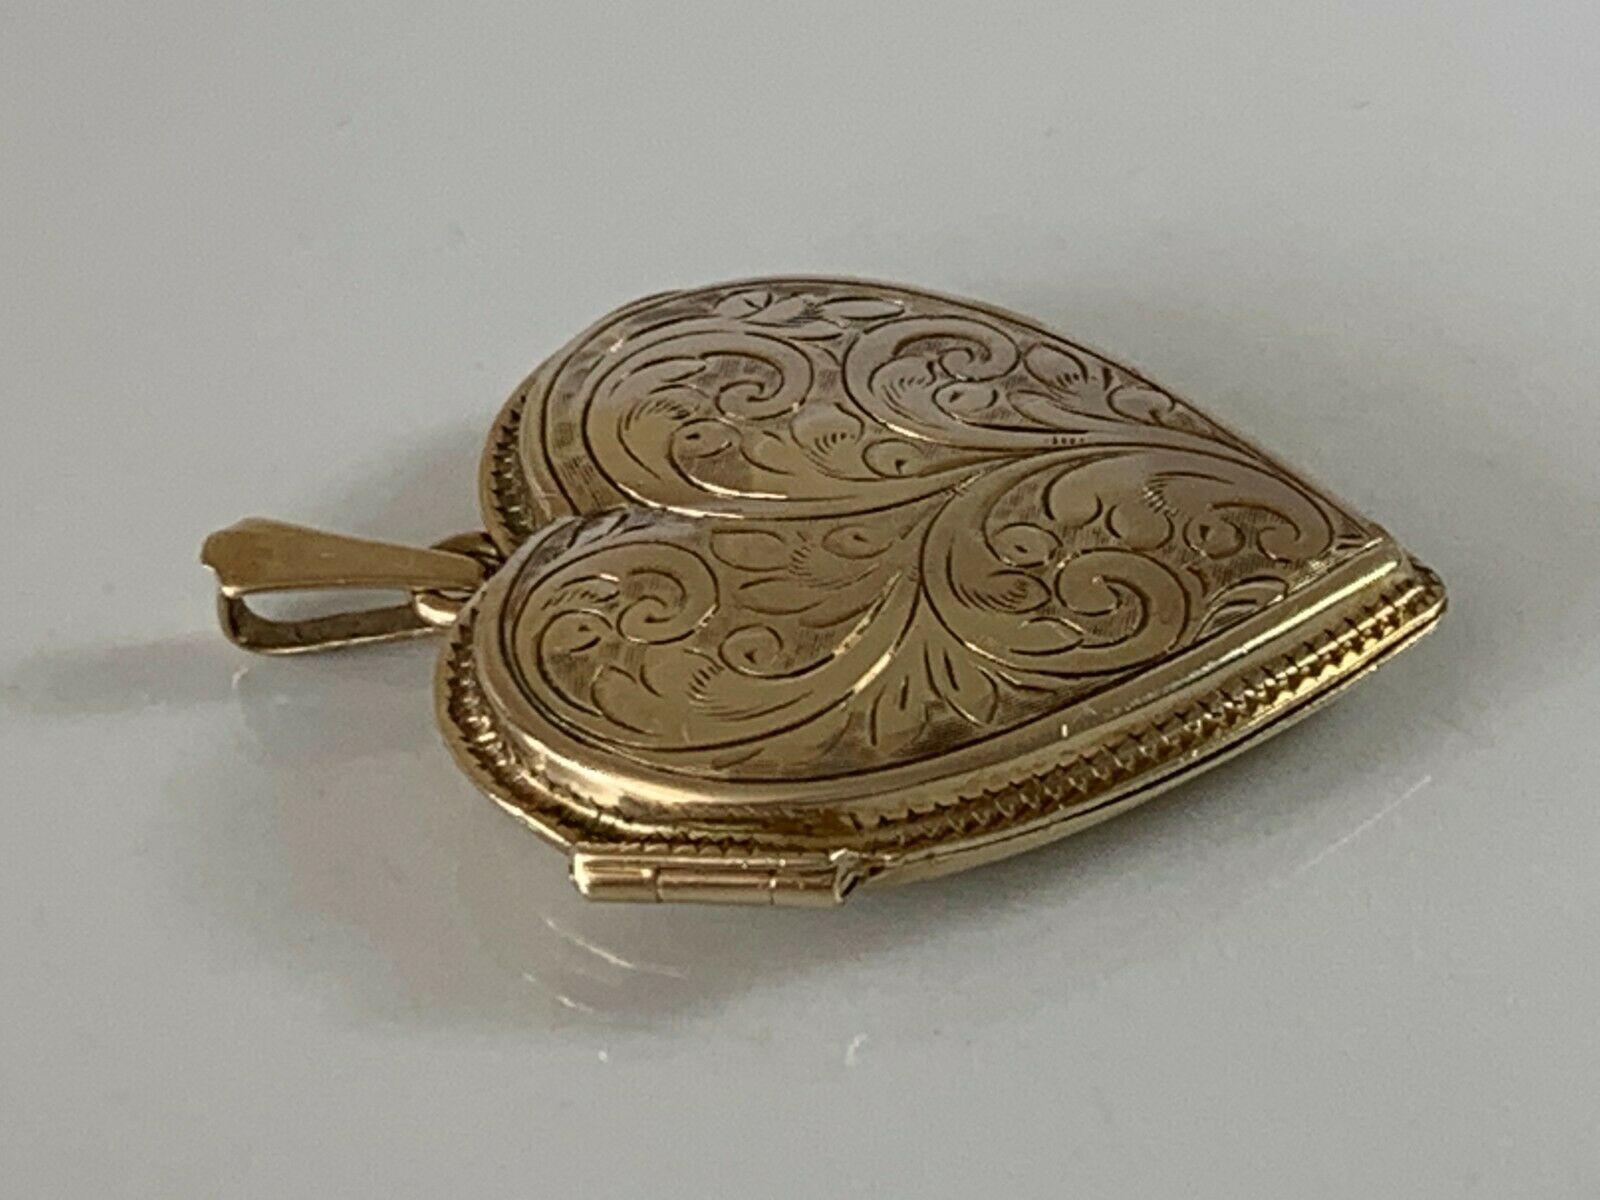 9ct 375 Gold Very Large Heart Locket
with beautiful front floral engraving
Fully Hallmarked Bail 
Era Late 20th Century
